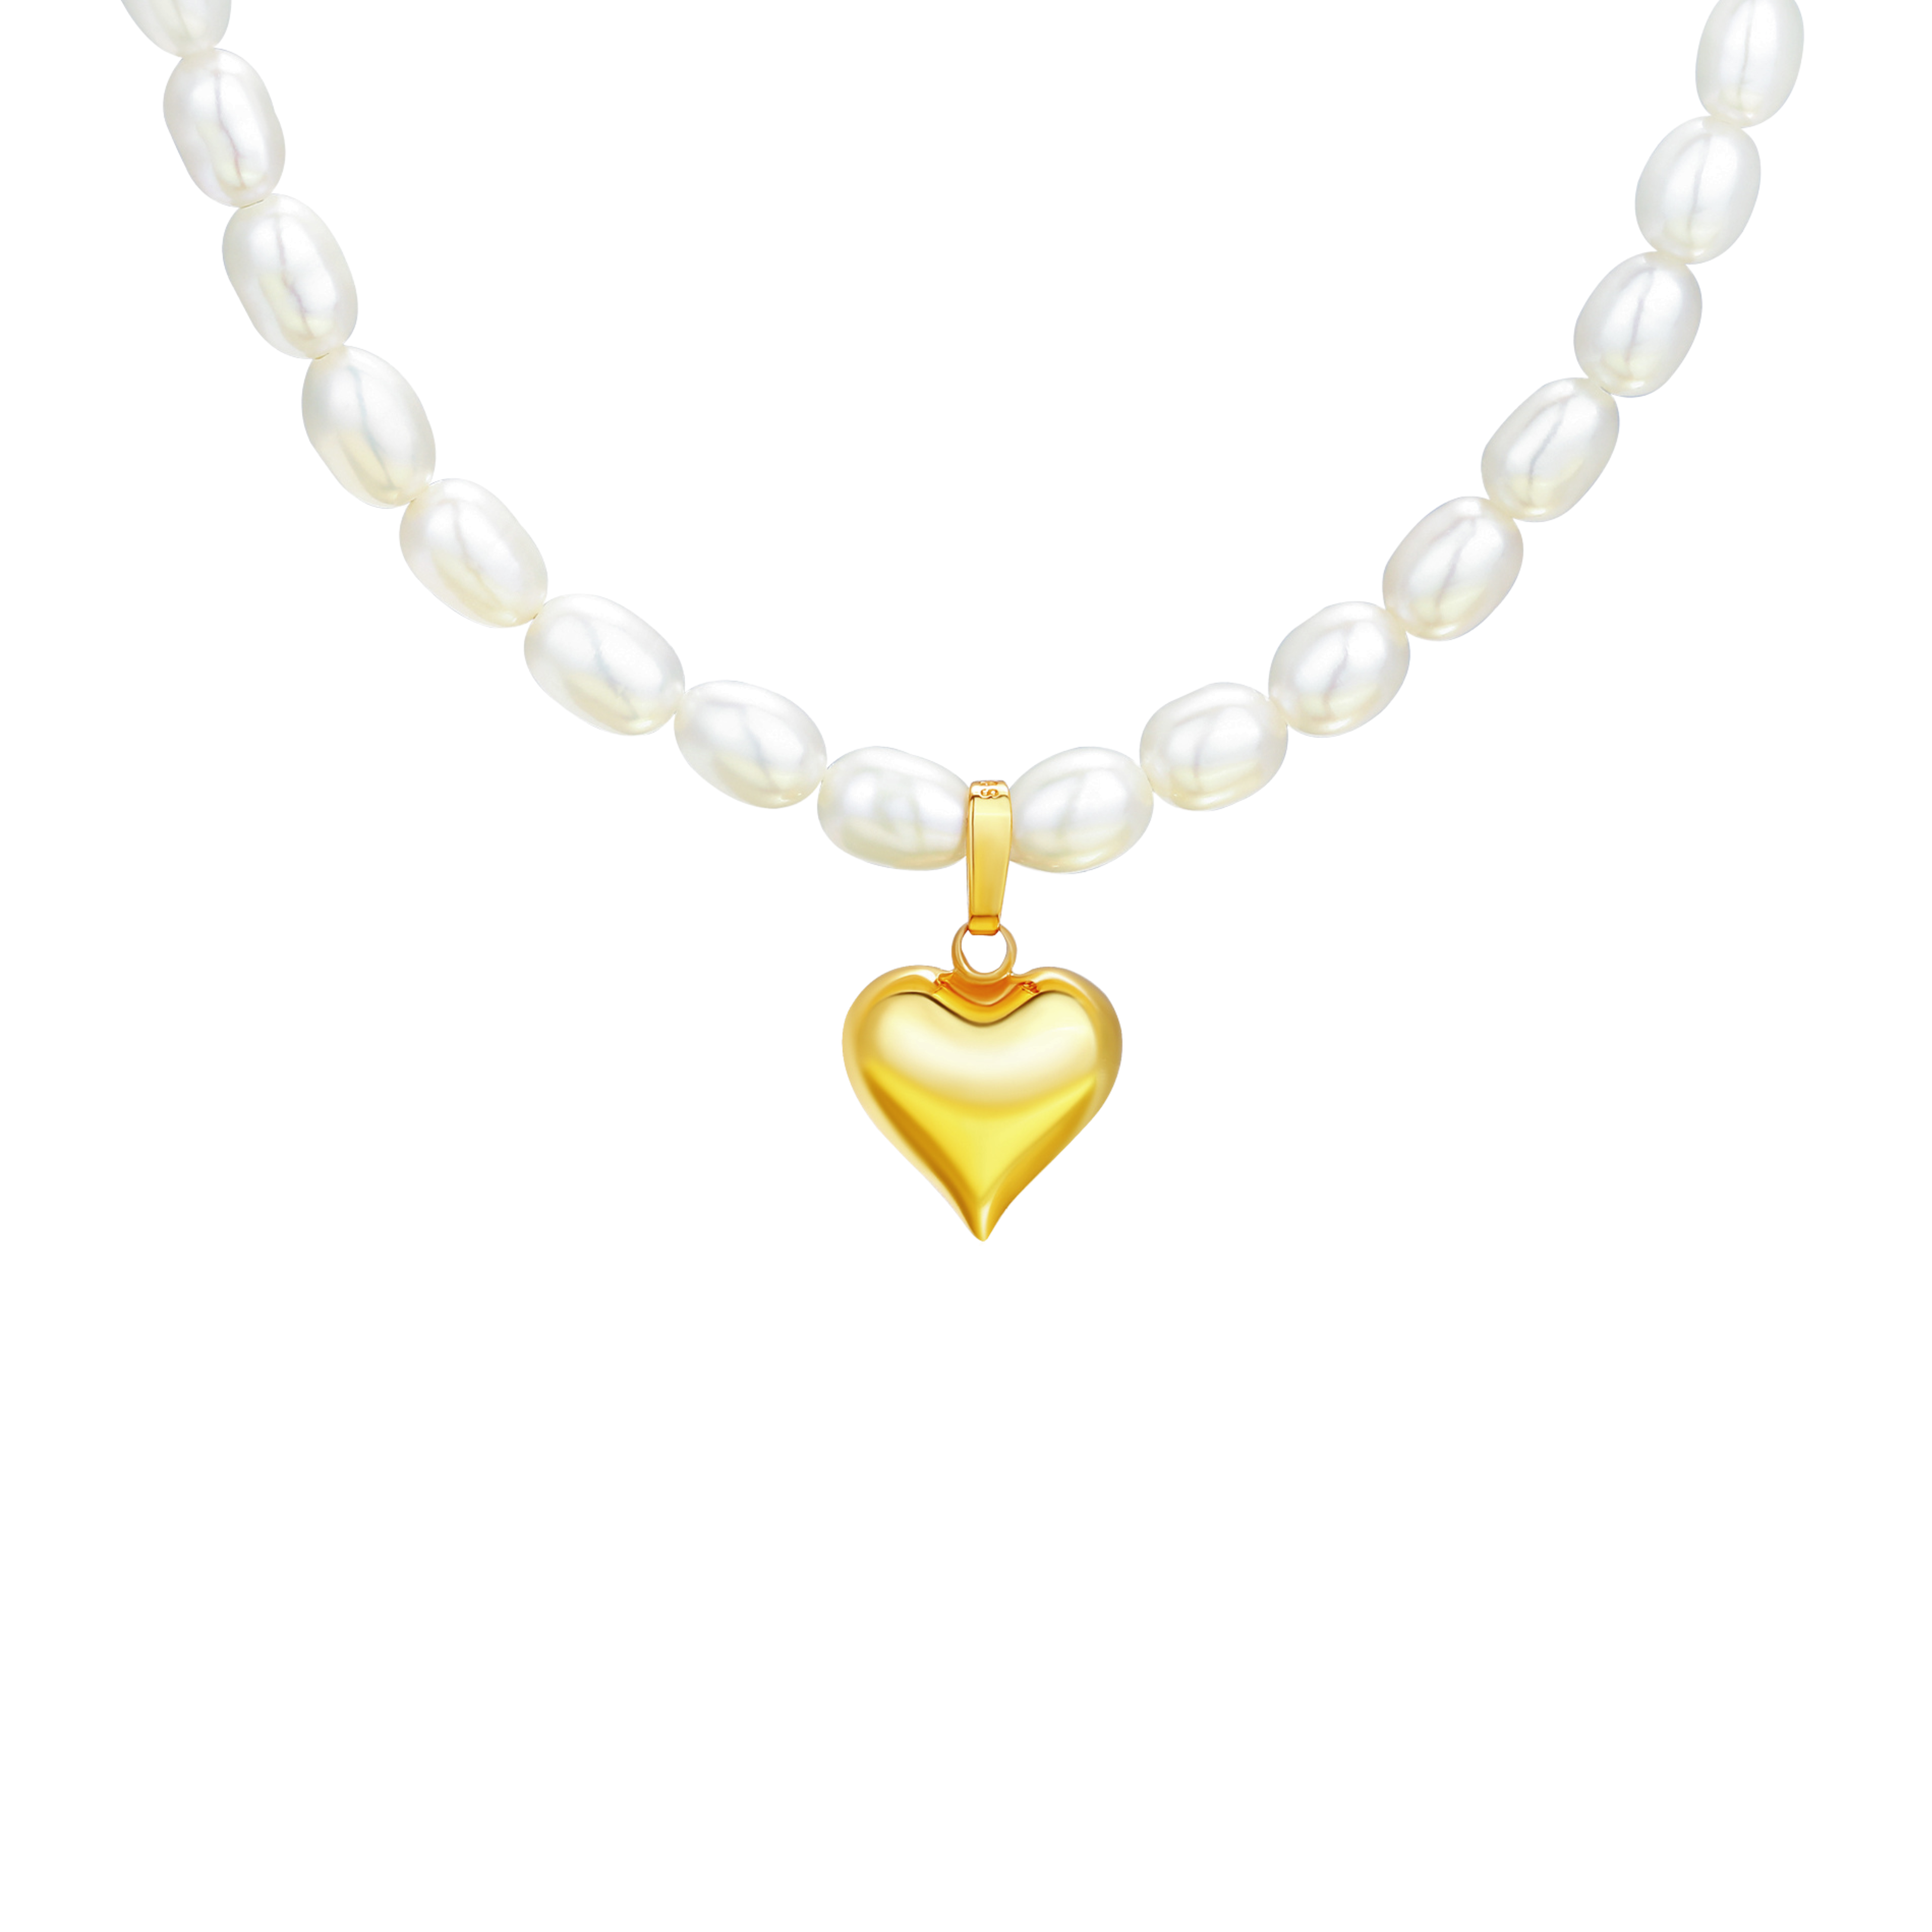 Pearl Necklace and Gold Heart Pendant